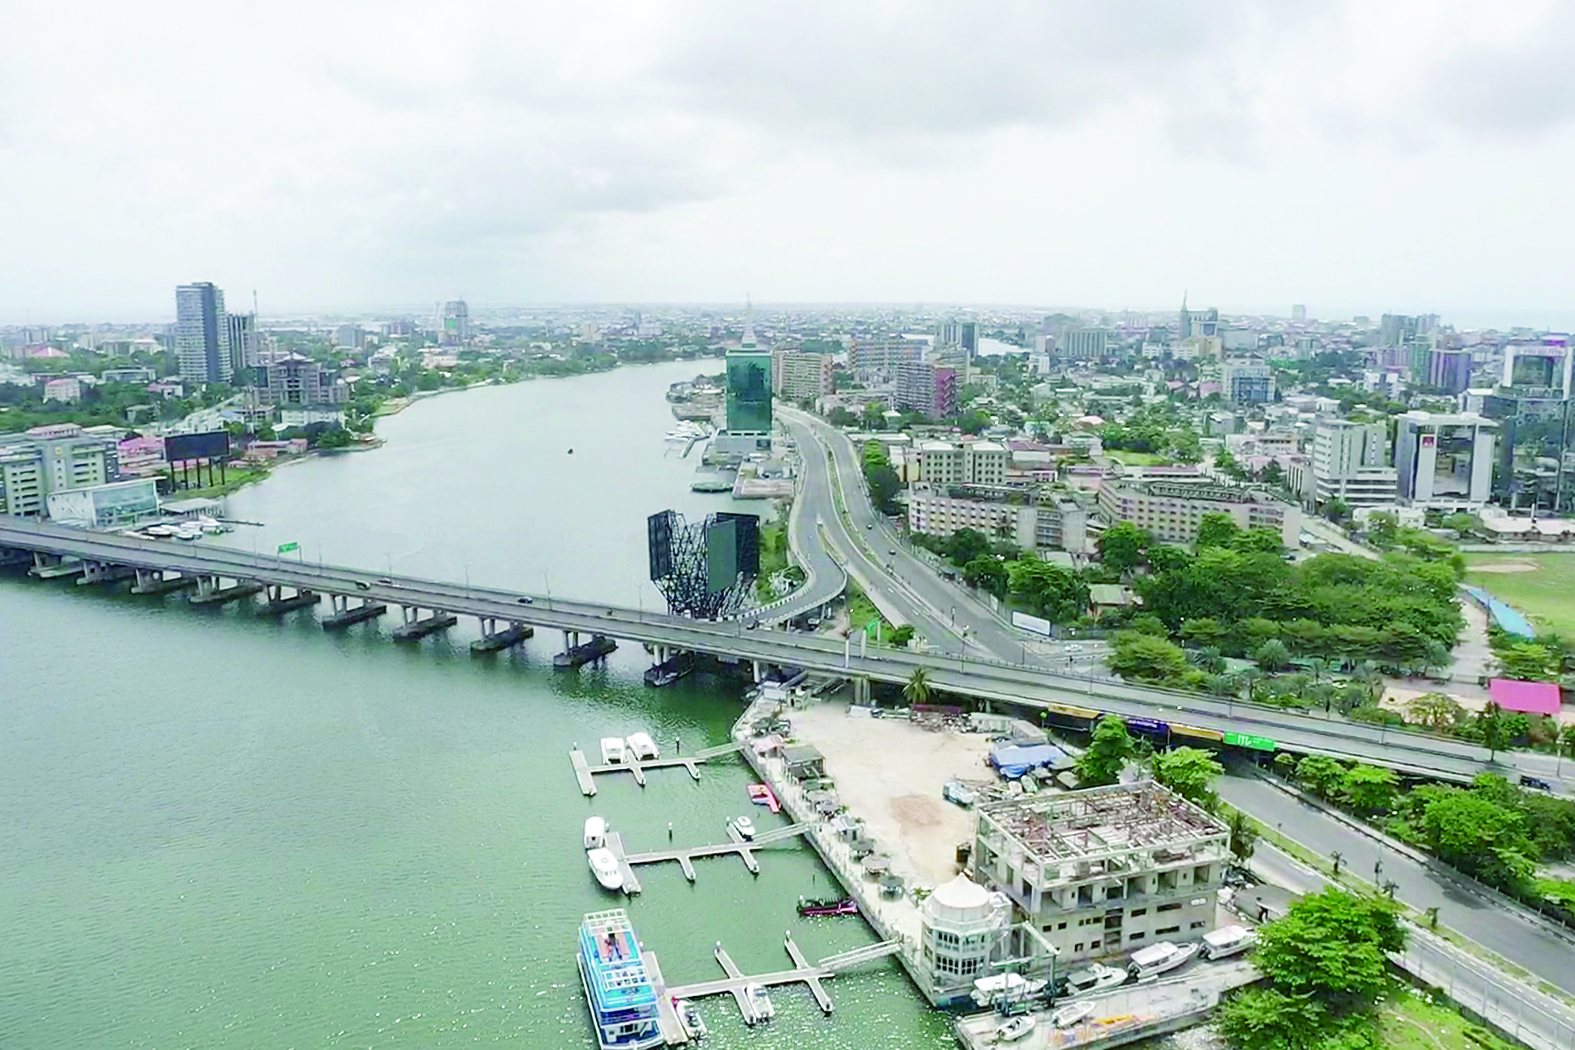 An aerial view shows empty streets in Lagos on March 31, 2020. - Lagos was deserted on March 31, 2020, after Nigeria locked down its economic hub and shuttered its capital Abuja, in the continent's latest effort to brake the juggernaut of COVID-19 coronavirus.†Businesses were closed, markets abandoned and streets empty as the usually chaotic megacity of 20 million, along with the capital Abuja, shuddered to a halt on the first full day of a two-week shutdown. (Photo by Pierre FAVENNEC / AFP)